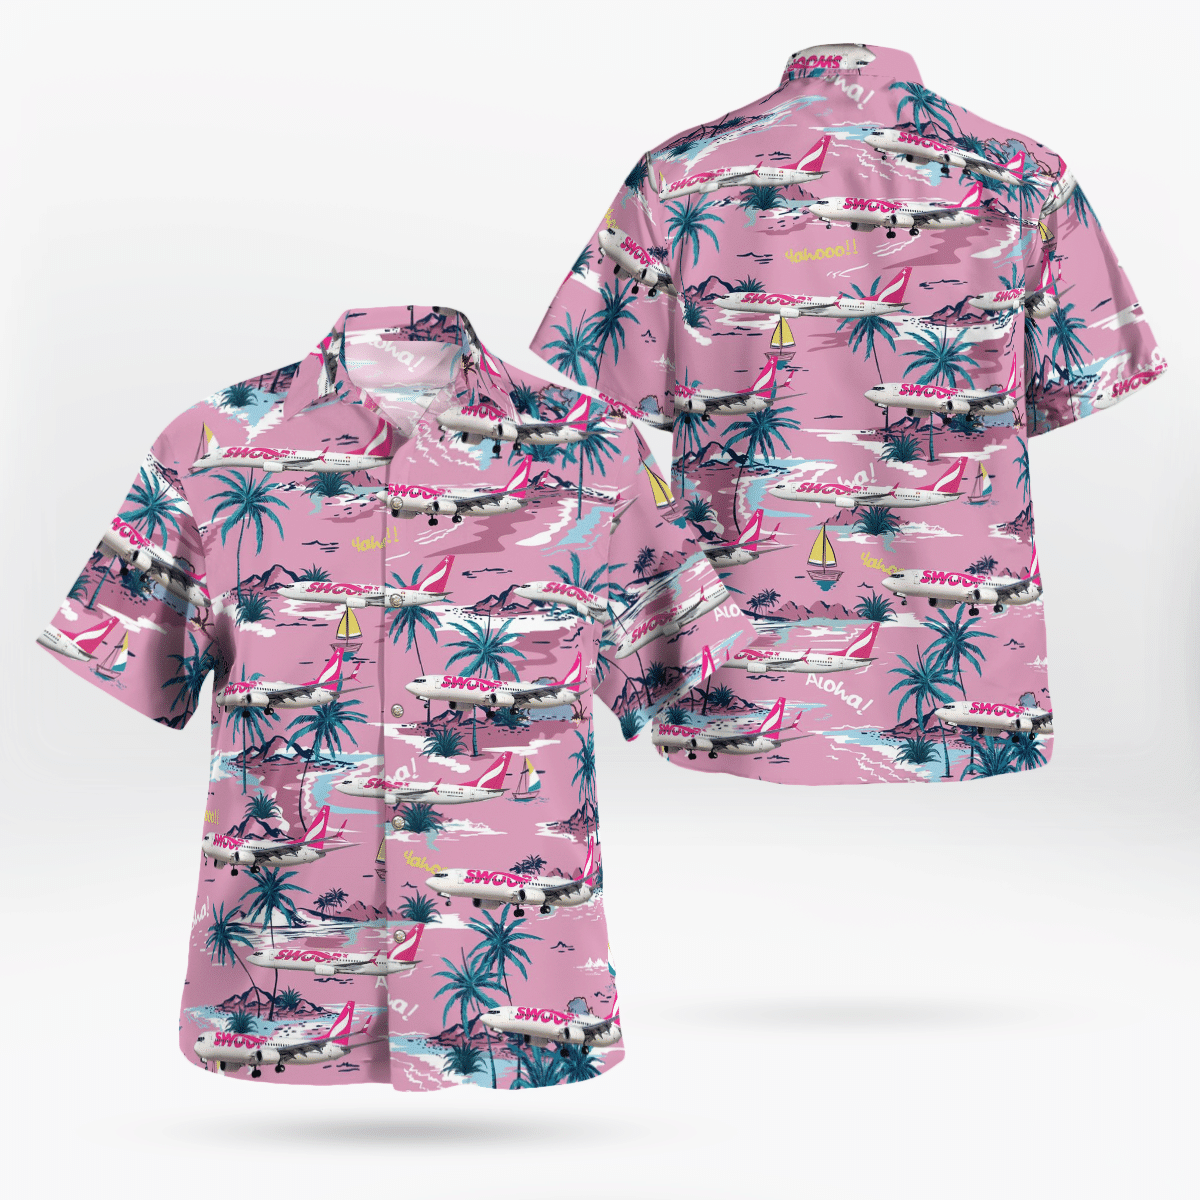 HOT Swoop airline Boeing 737-800 Tropical Shirt2